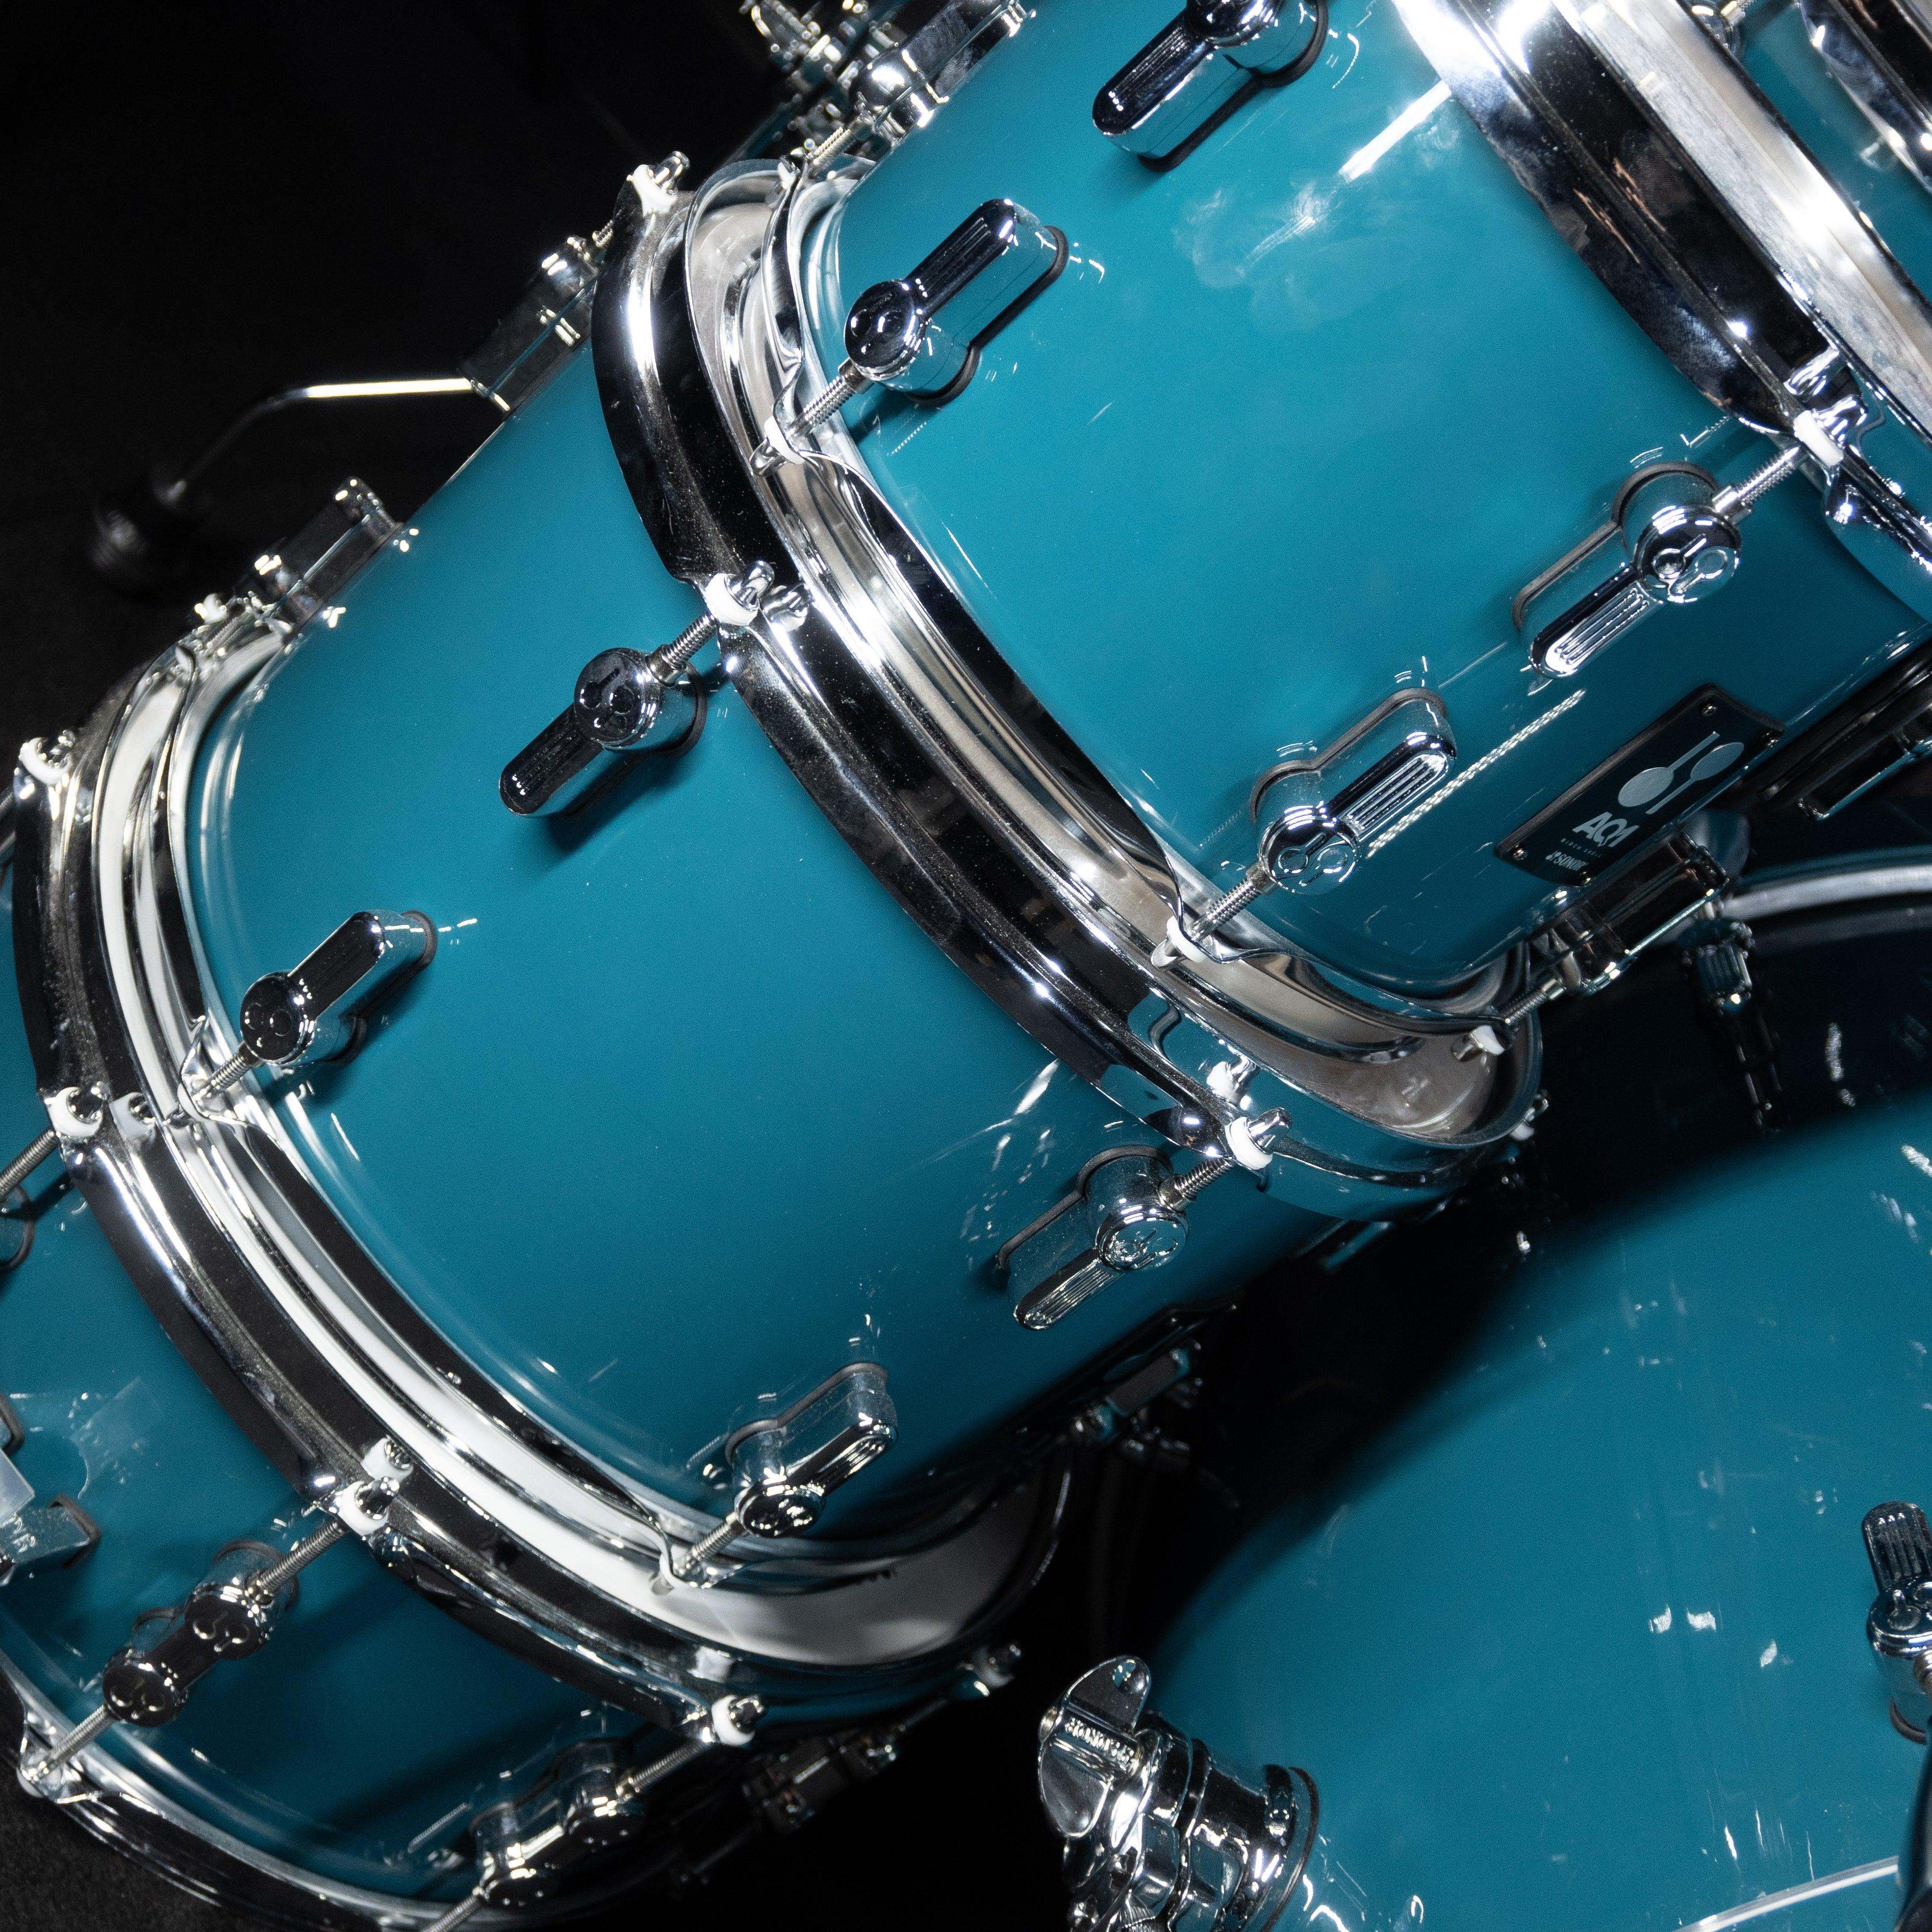 Sonor AQ1 Stage 5 Piece Drum Kit with Hardware (Caribbean Blue) USED - Impulse Music Co.